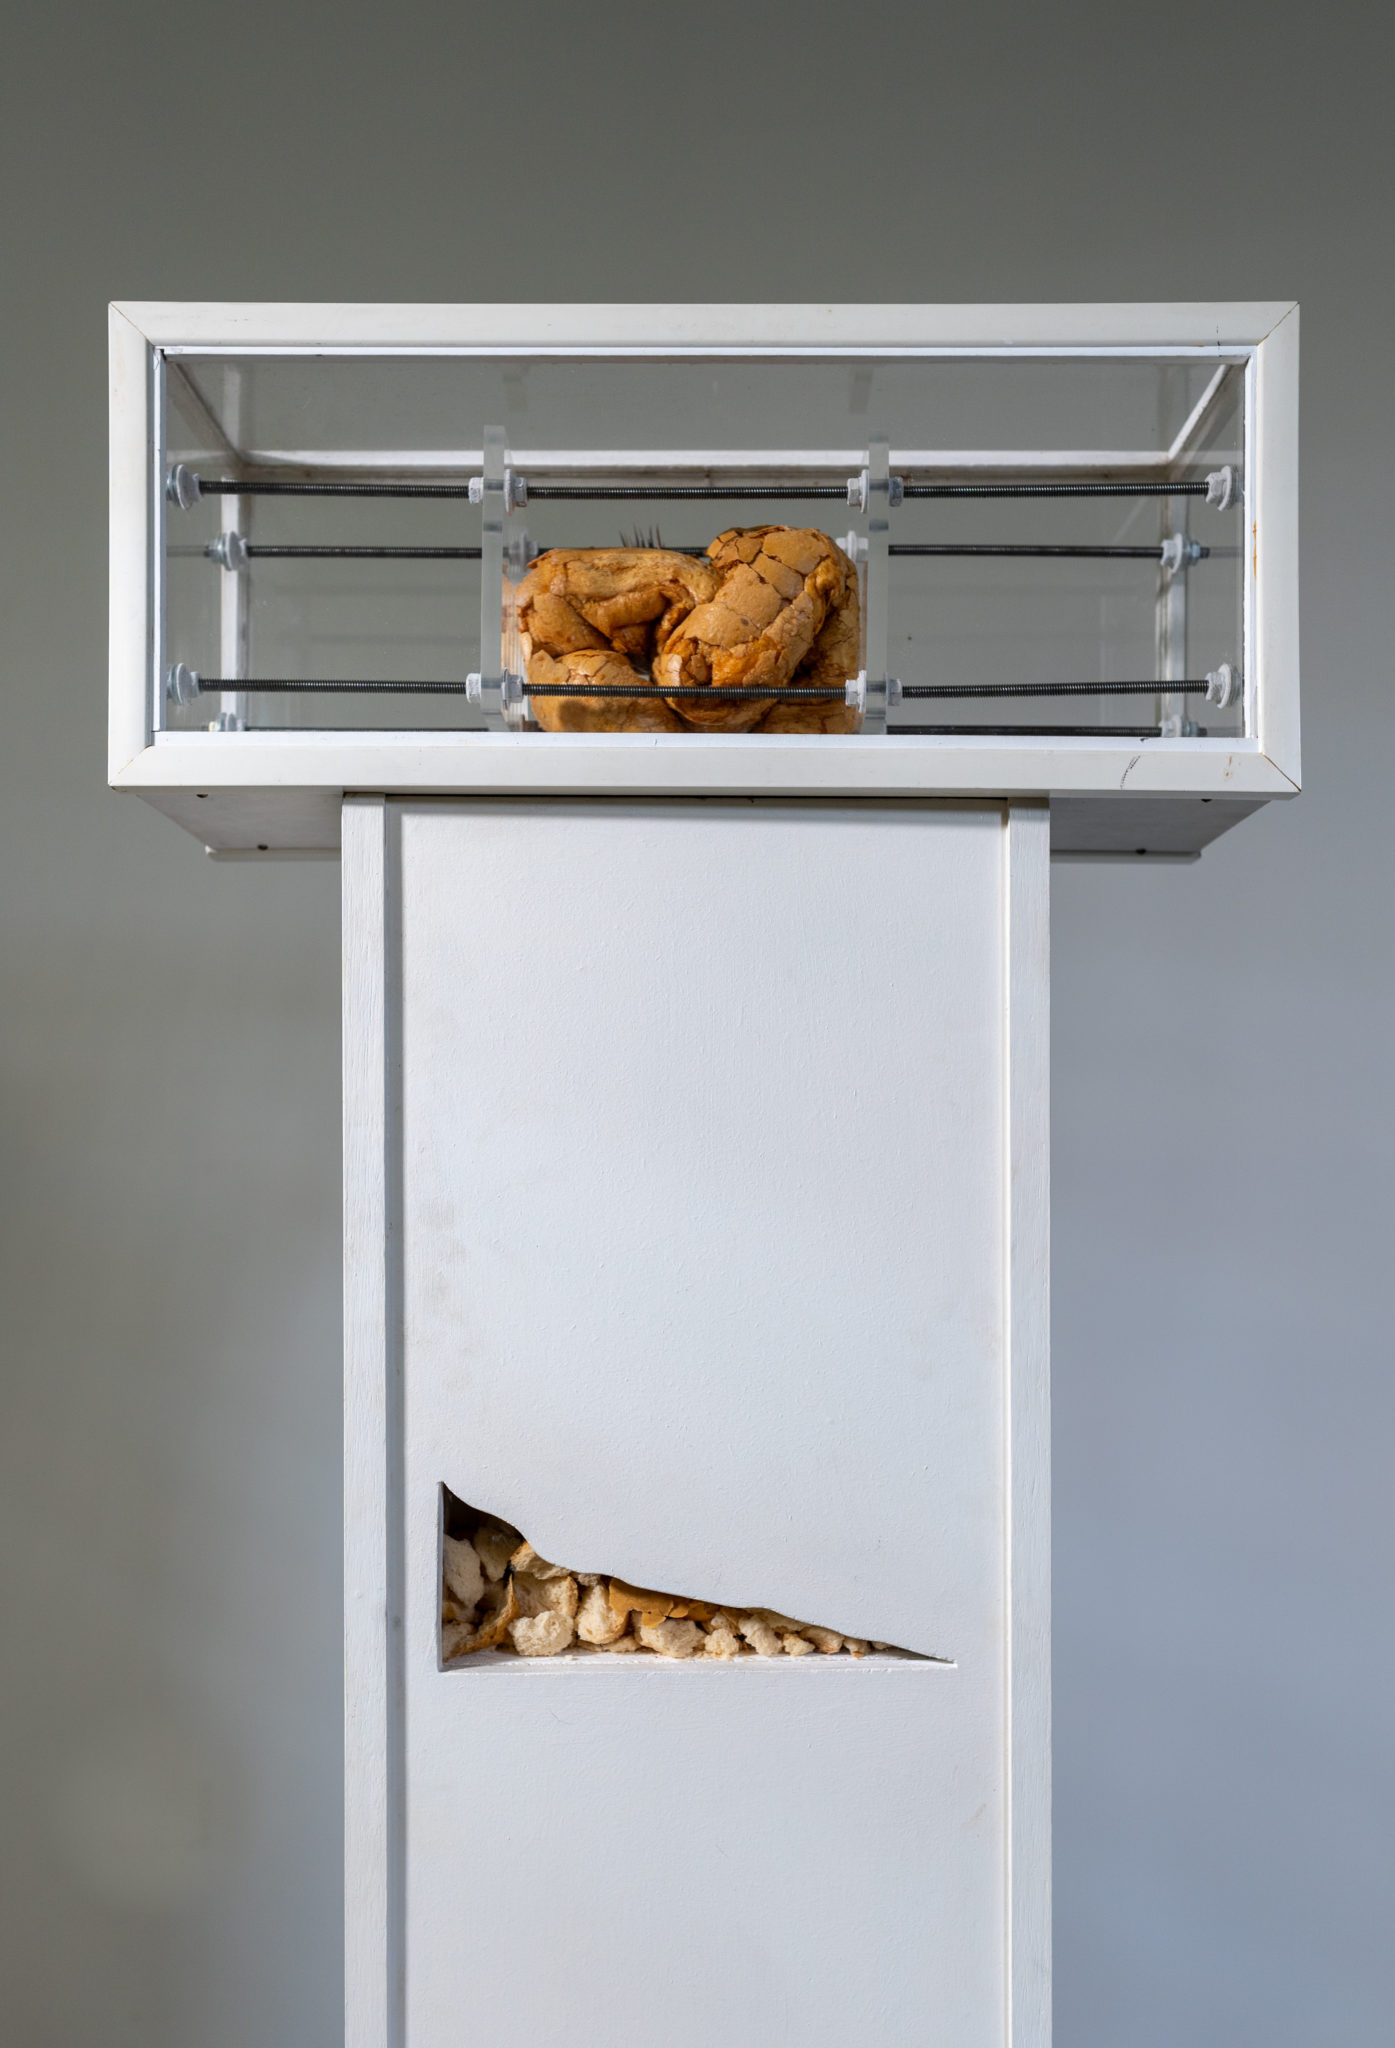 Dan Wollmering, (Breadworks No. 2) In Adoration II, 1980, MDF plinth, Perspex box, and mixed media, 144 x 54 x 64 cm, Latrobe Regional Gallery Collection, gift of the artist, 1989.